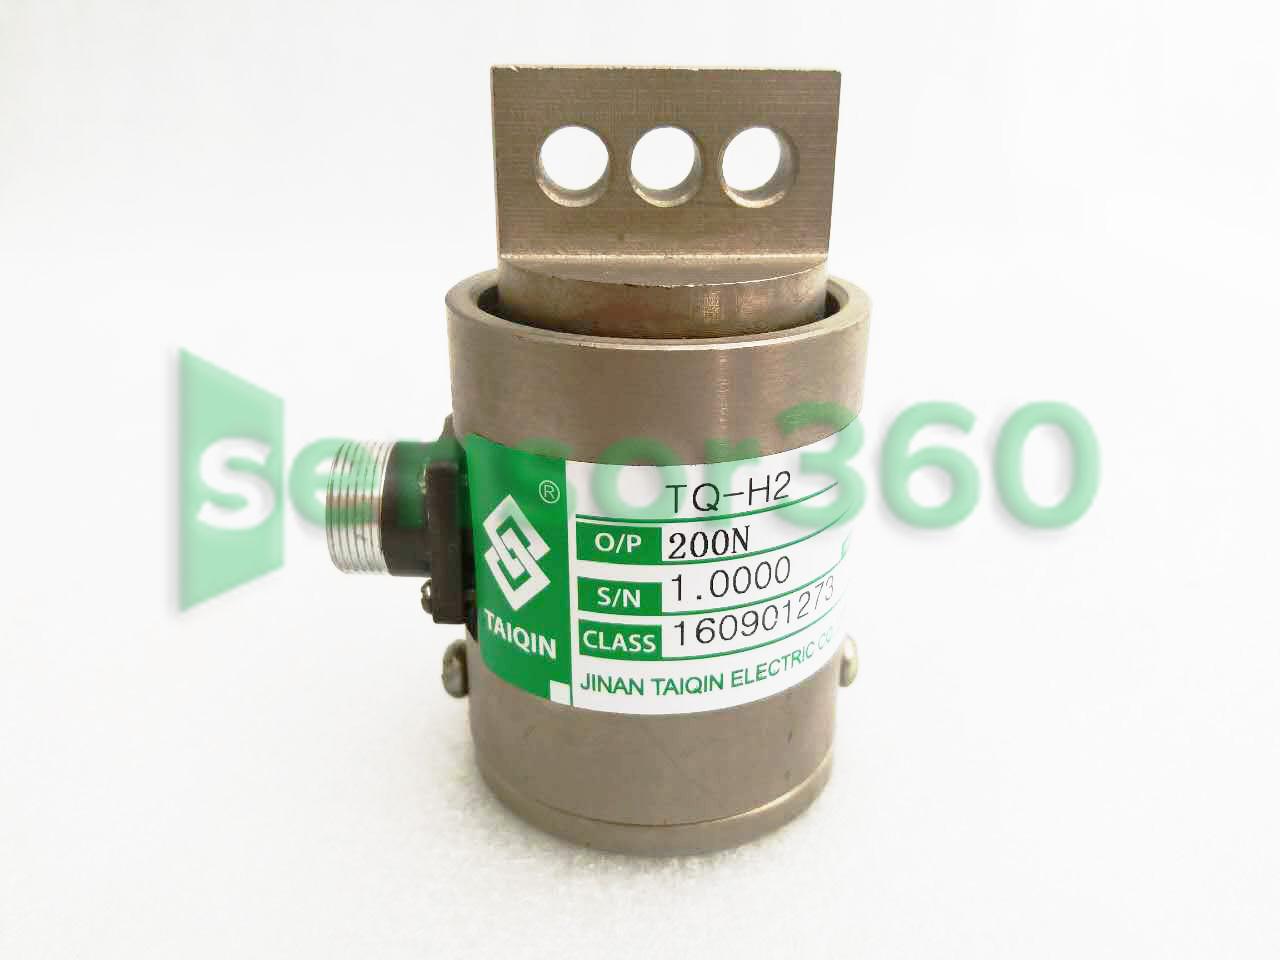 TQ-H2 cylindrical side-pull load cell